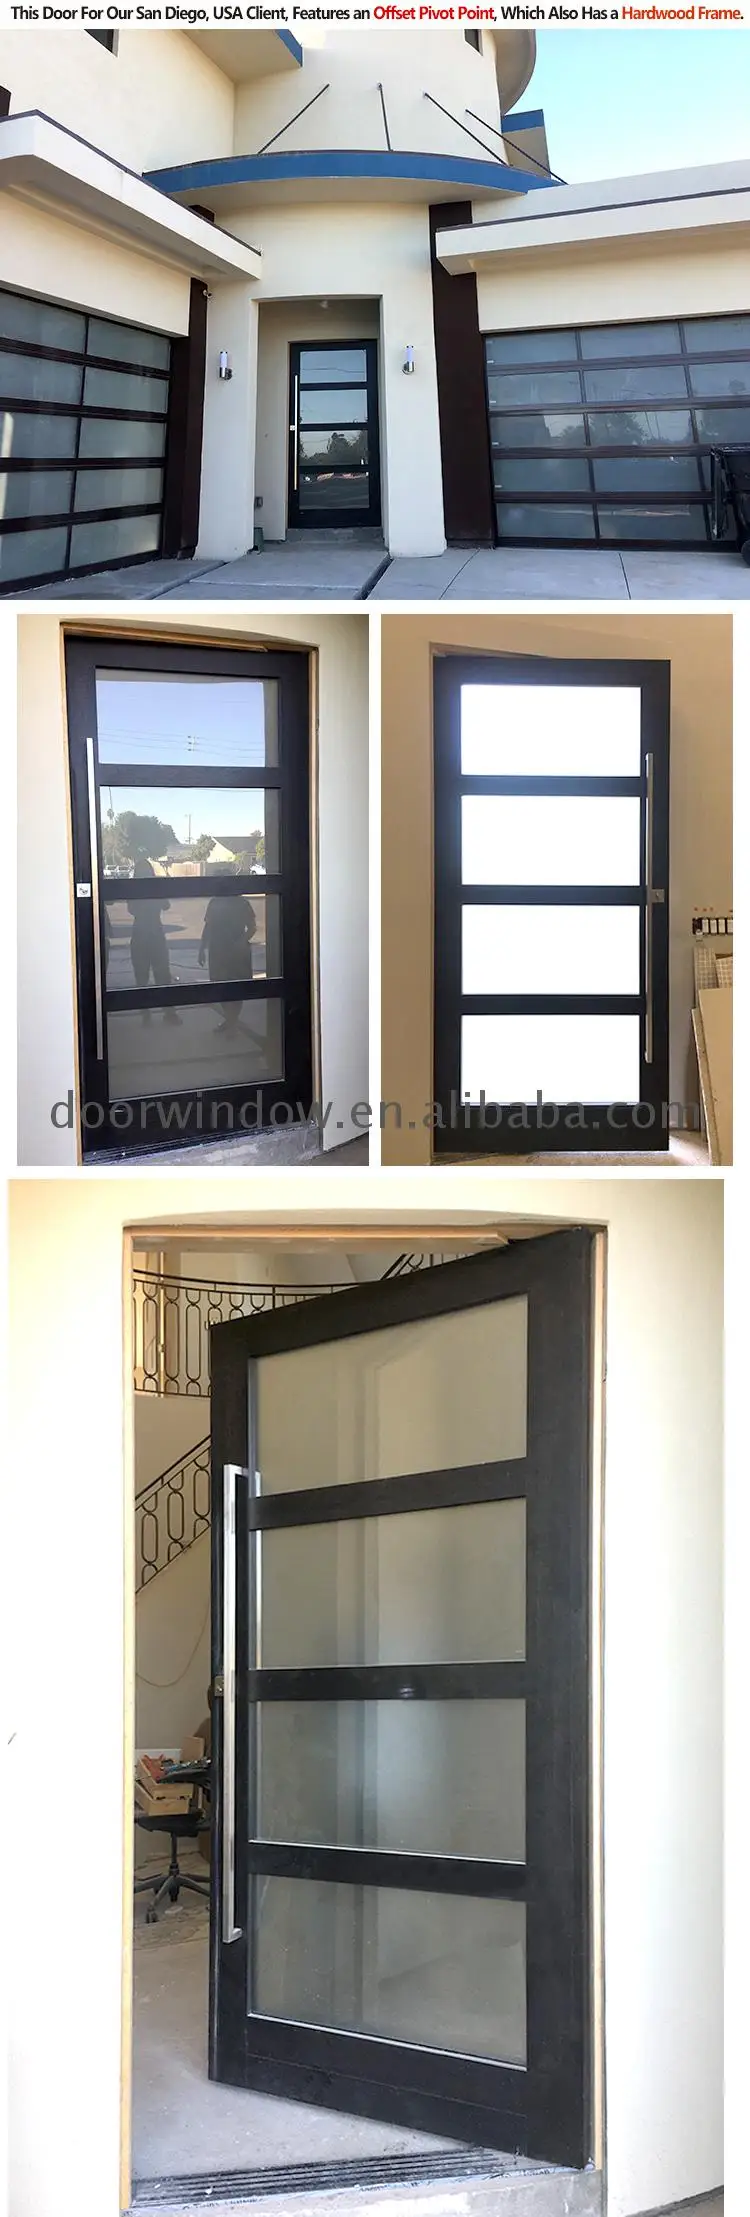 Factory made 6 panel door with glass inserts